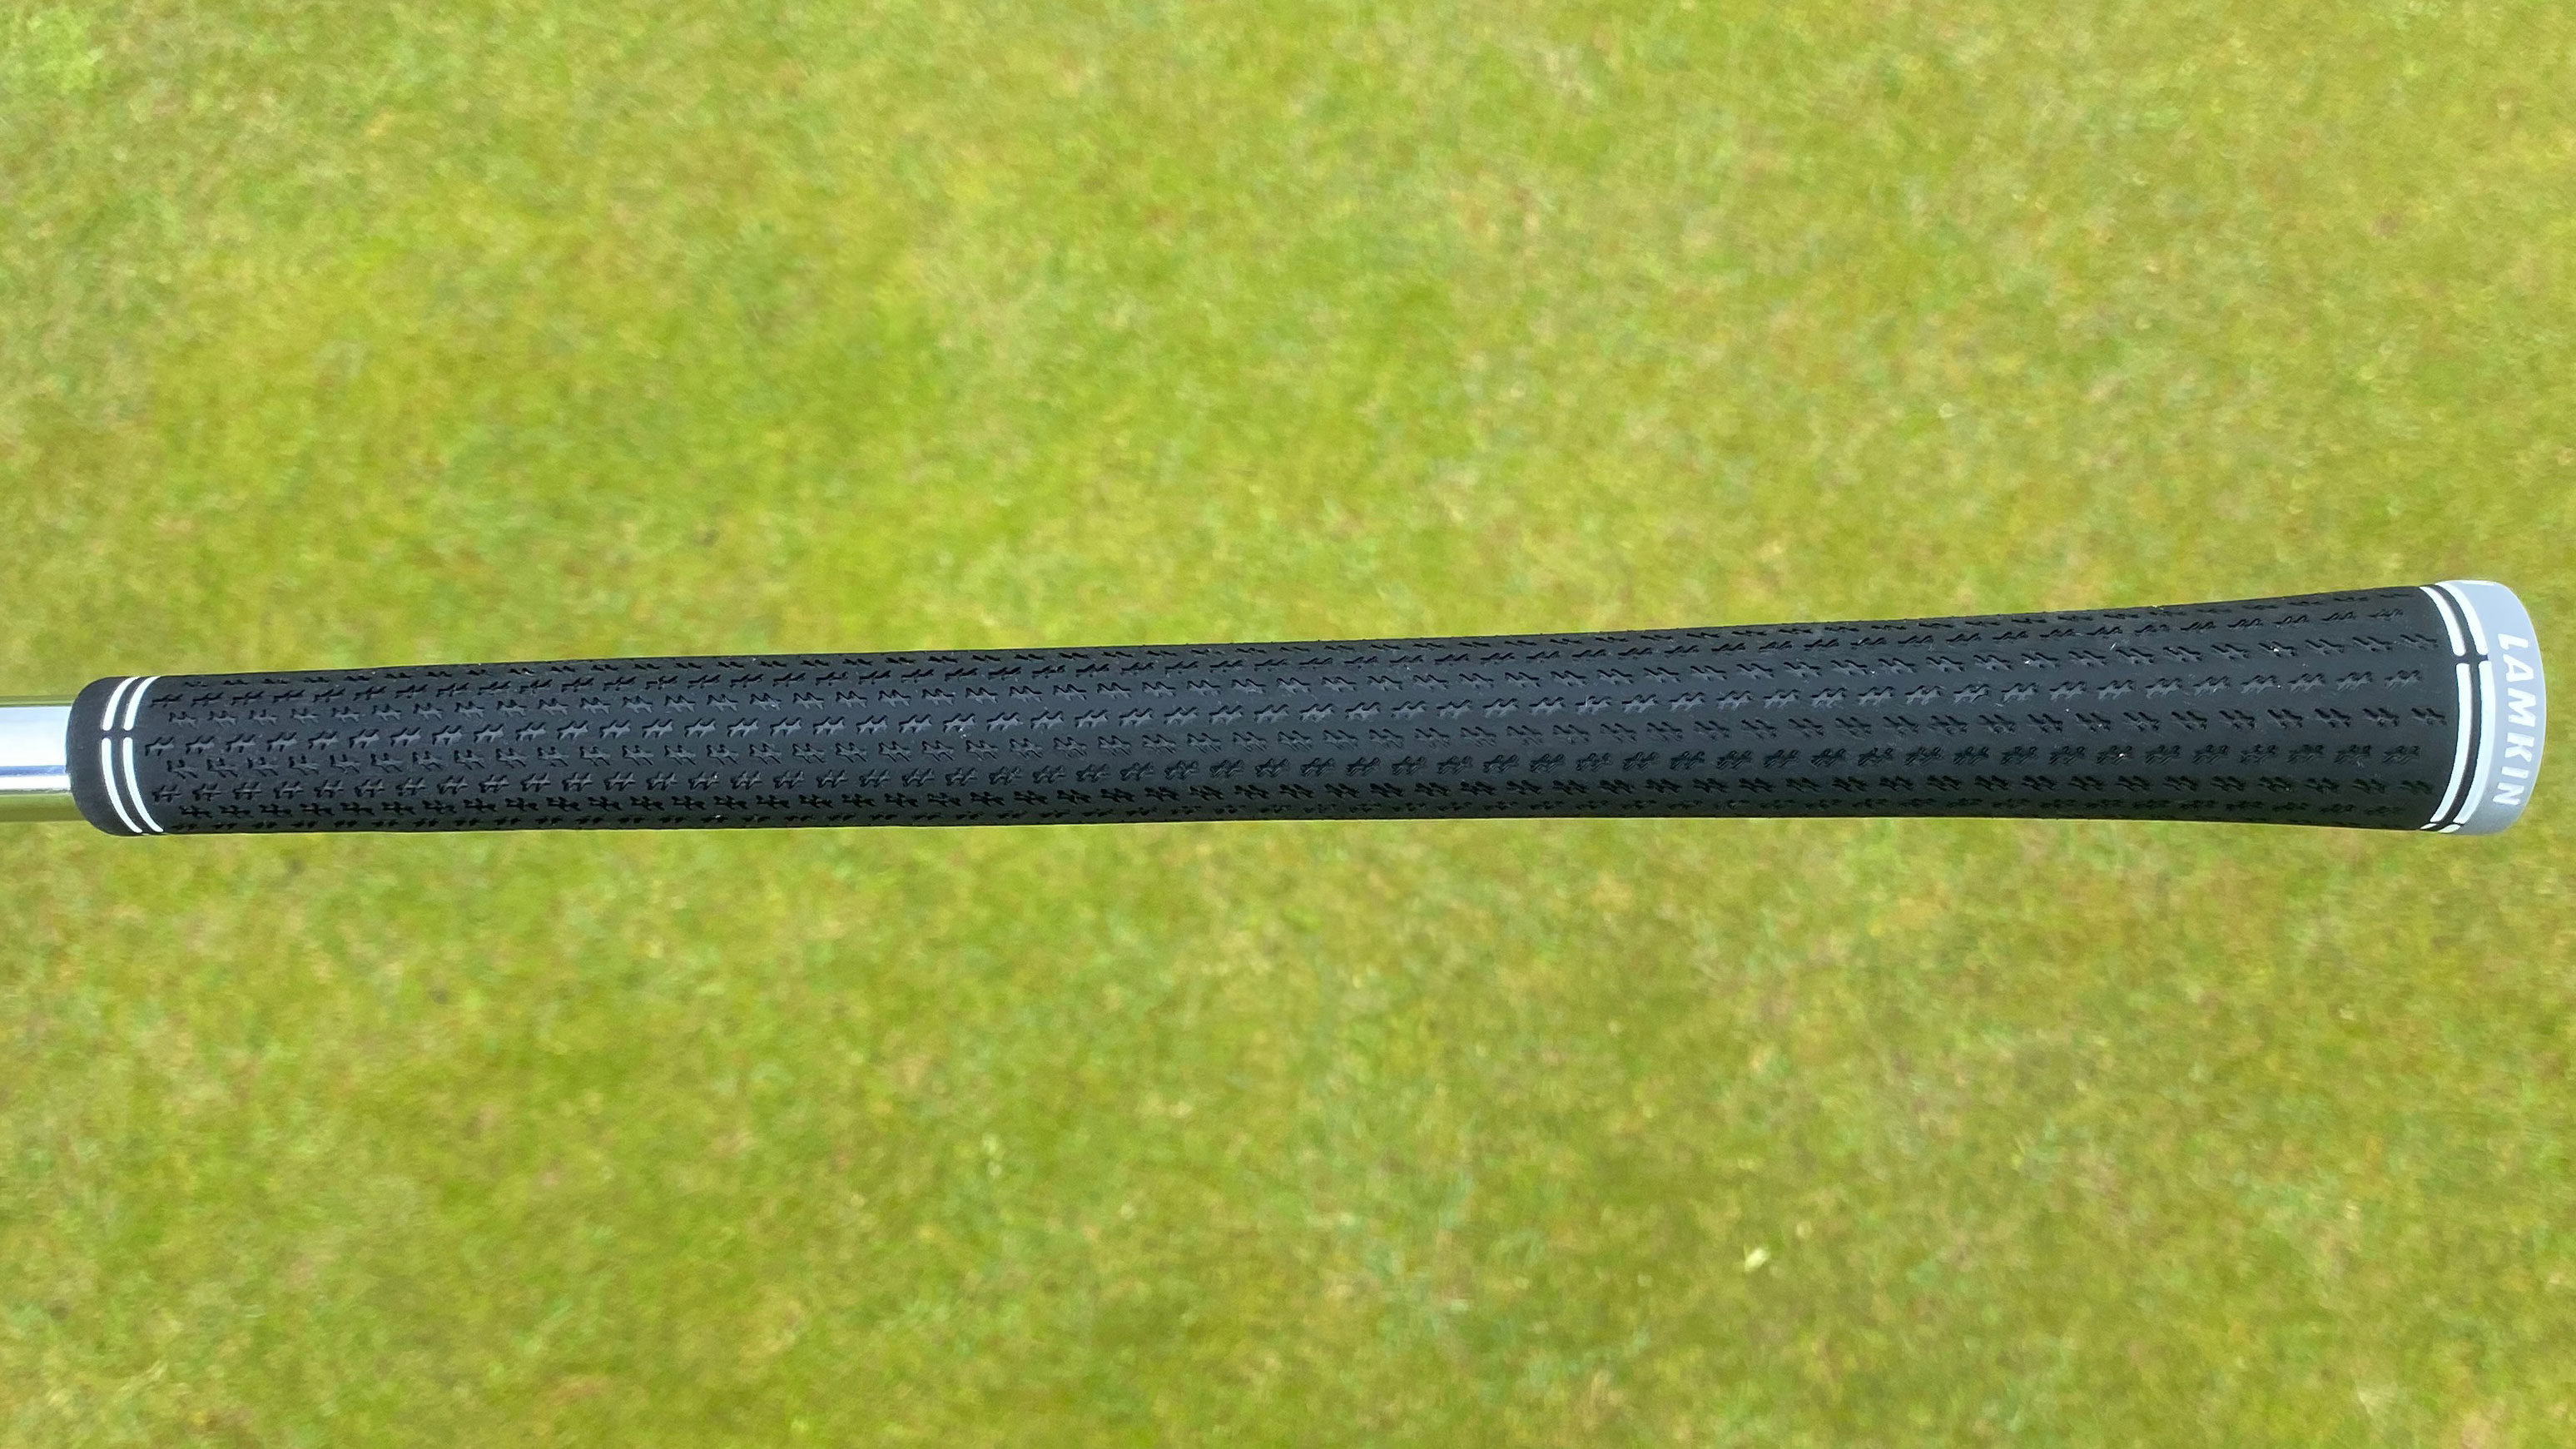 Photo of the lamkin grip of the Tour Edge Hot Launch C524 Irons